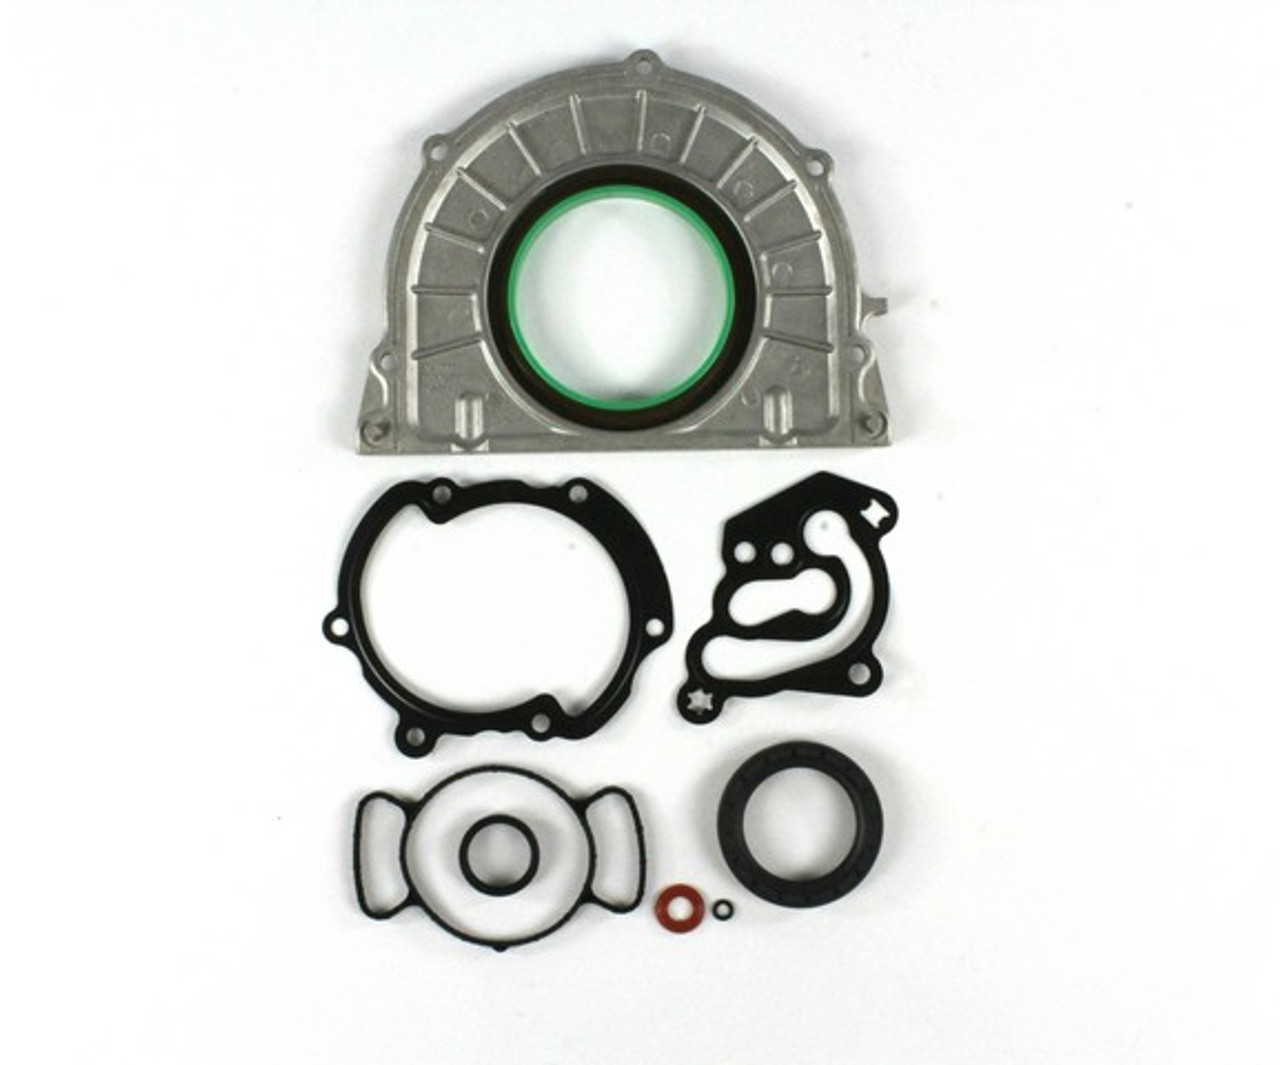 Lower Gasket Set 3.0L 2013 Cadillac CTS - LGS3136.45